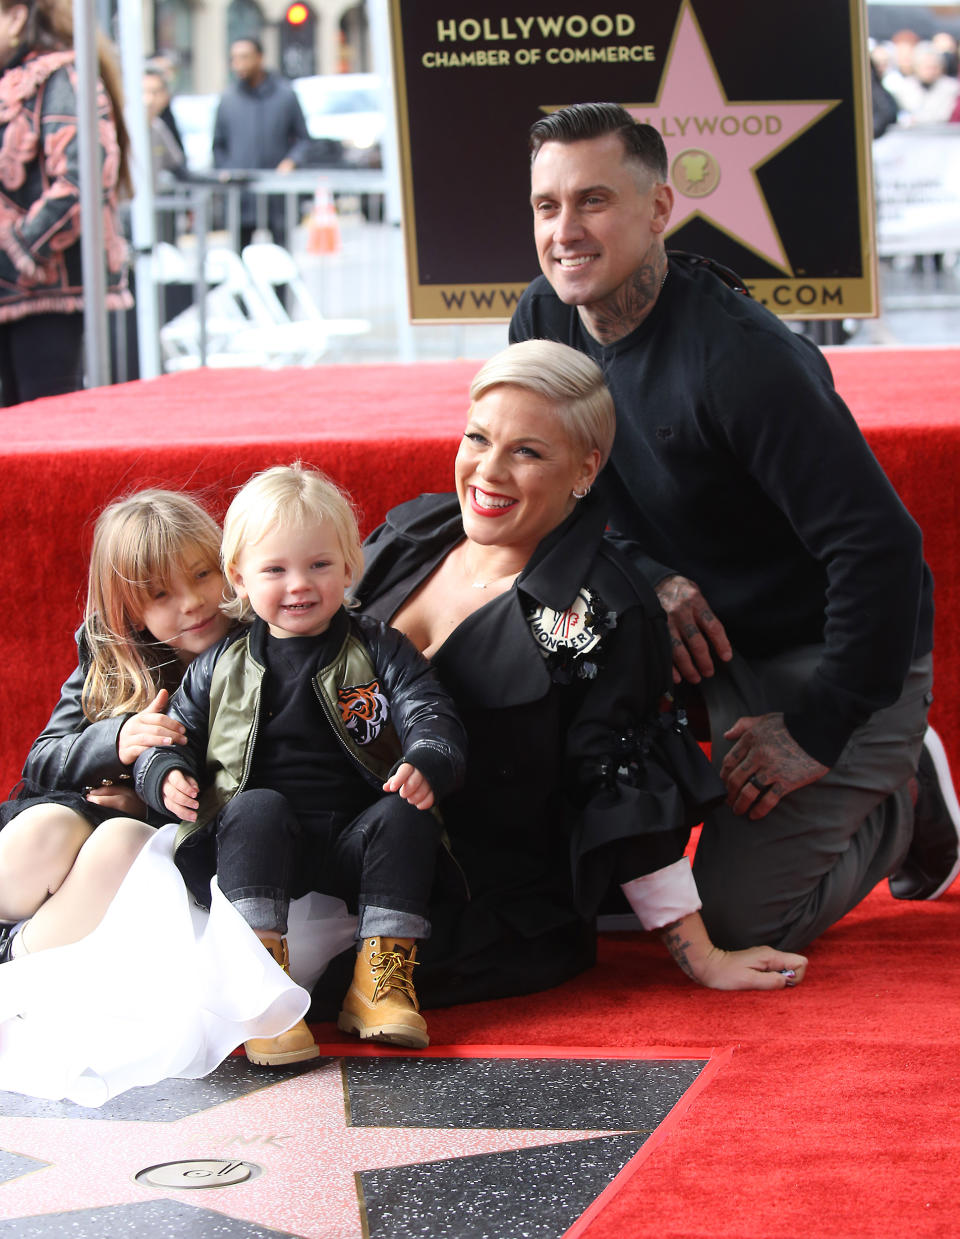 Image: Pink Honored With Star On The Hollywood Walk Of Fame (Michael Tran / FilmMagic/Getty Images file)